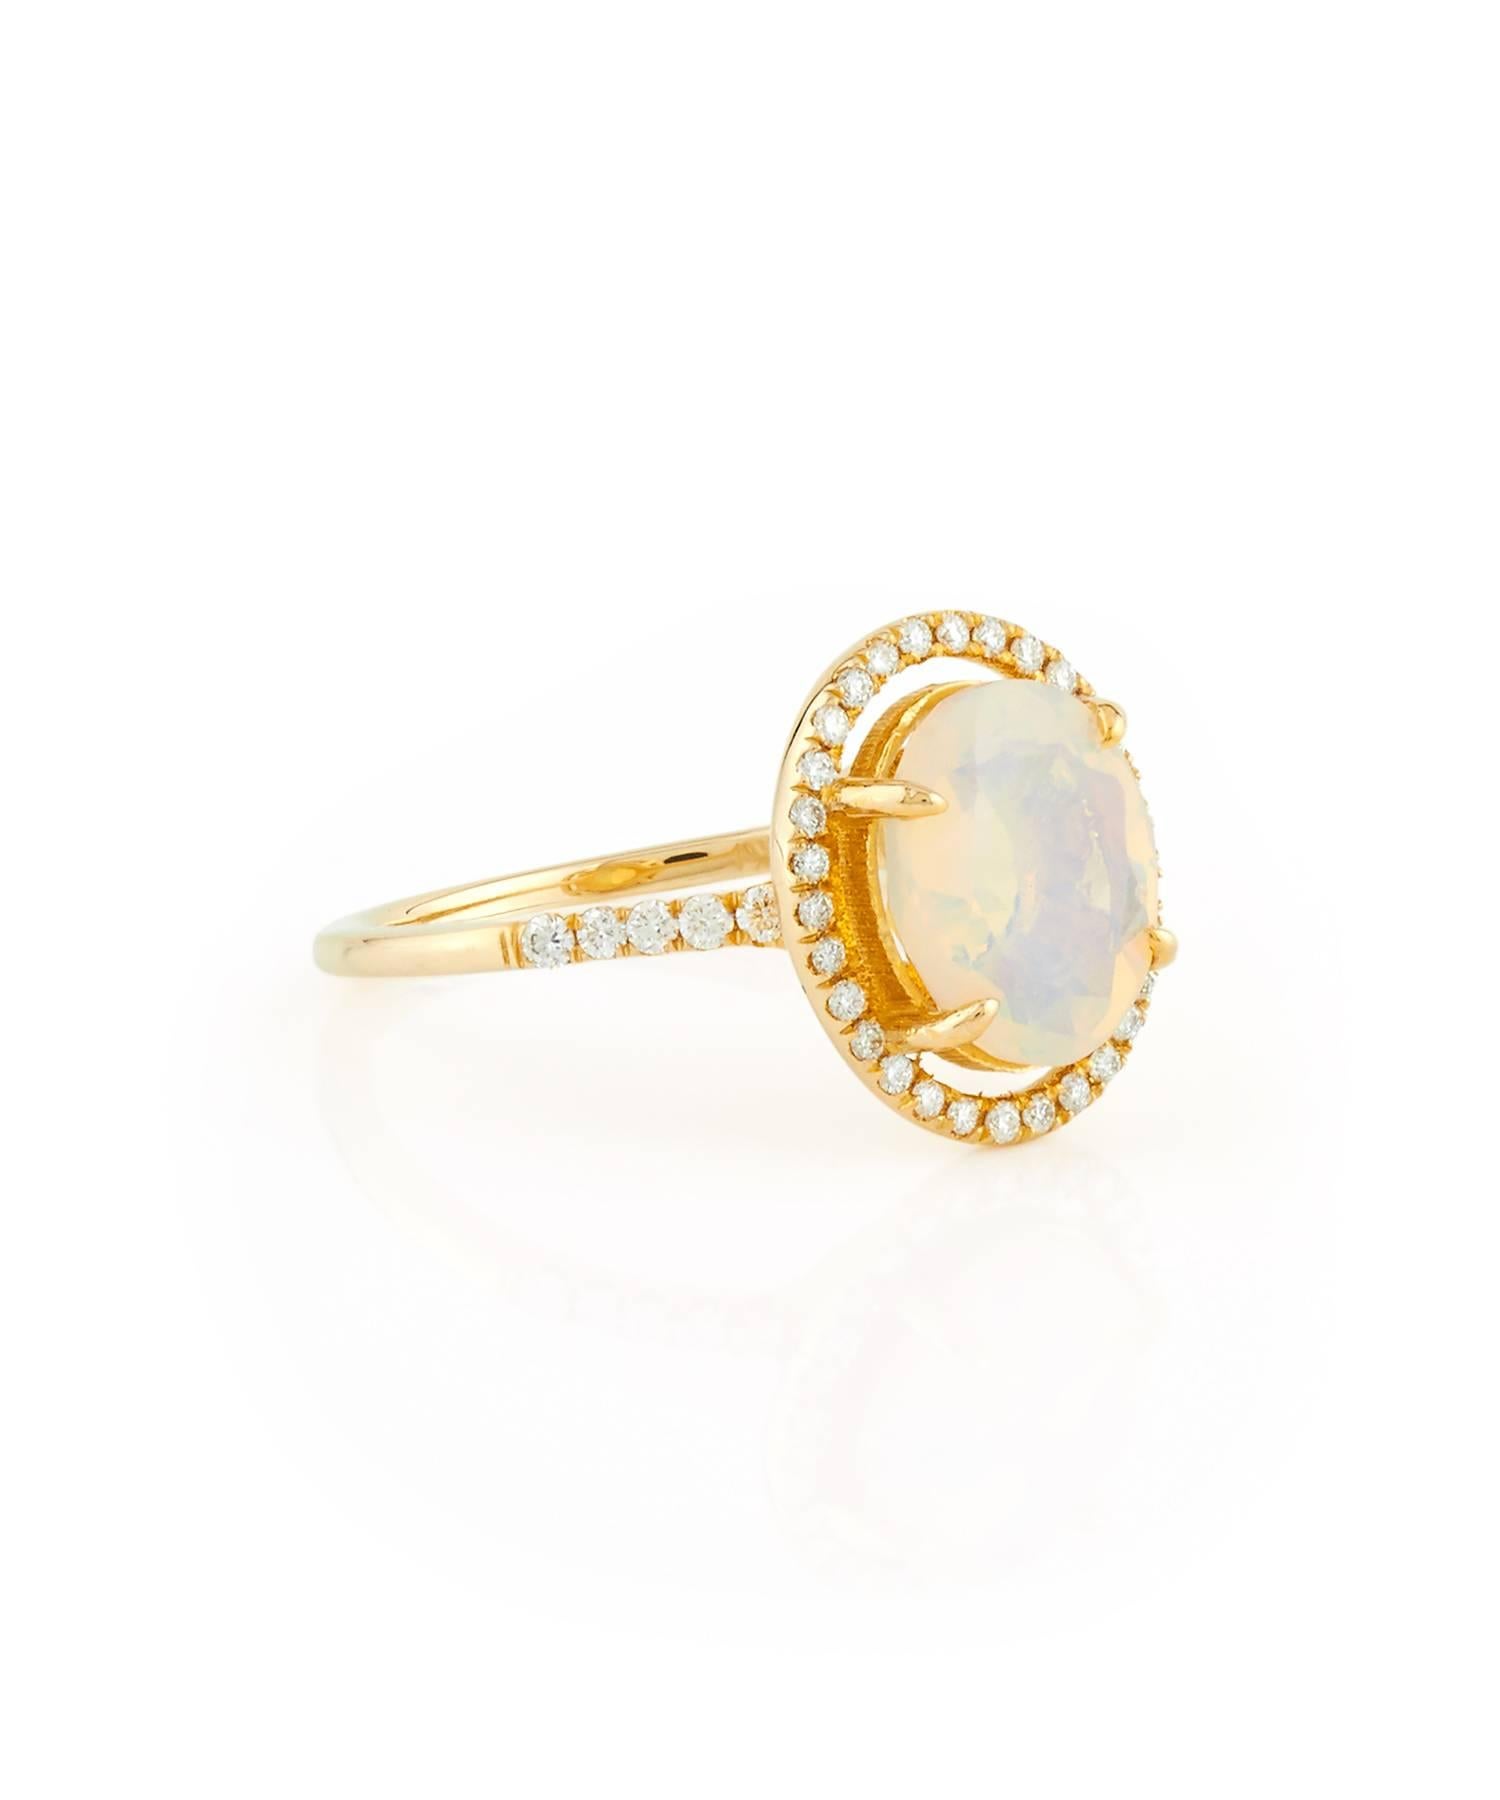 Drawing inspiration from the constellation, this gorgeous halo of round diamonds orbits around a unique oval opal. This ring in photos is a size 5.5 and ready to ship. Please contact for another size.

• 18kt yellow gold
• Ethiopian Welo opal & VS+